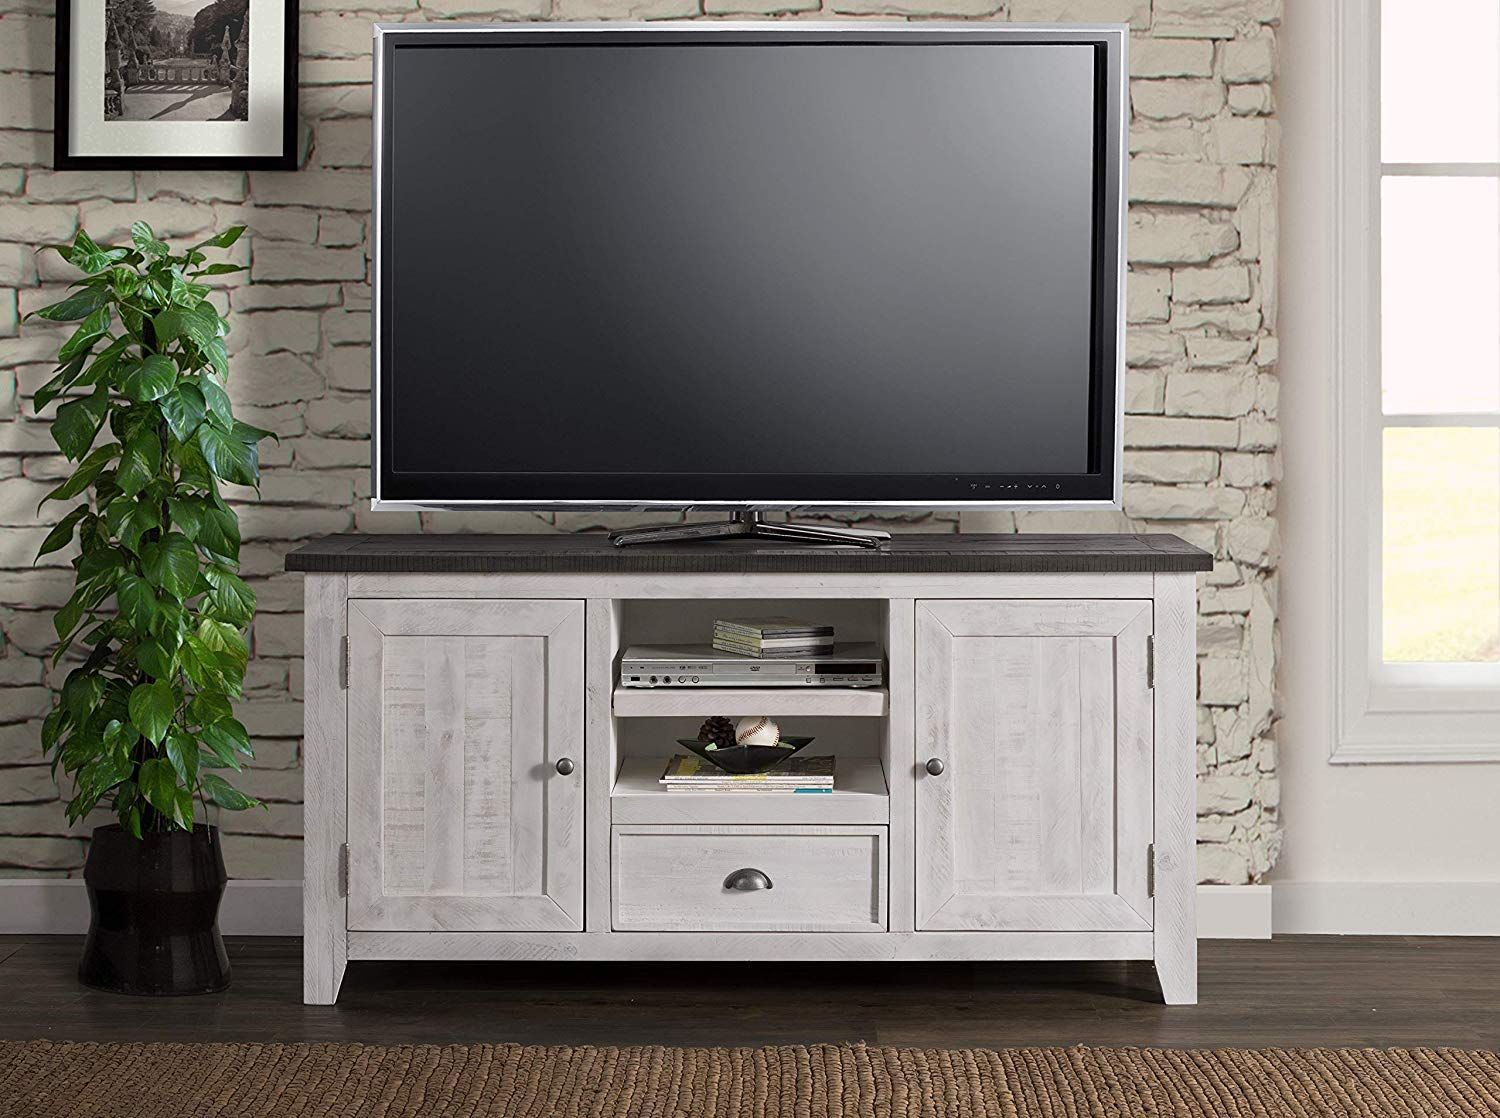 Farmhouse Tv Stand: Cozy And Functional Entertainment Centers – Farmhouse  Goals | Farmhouse Tv Stand, Rustic Tv Stand, Solid Wood Tv Stand Regarding Farmhouse Tv Stands (View 7 of 15)